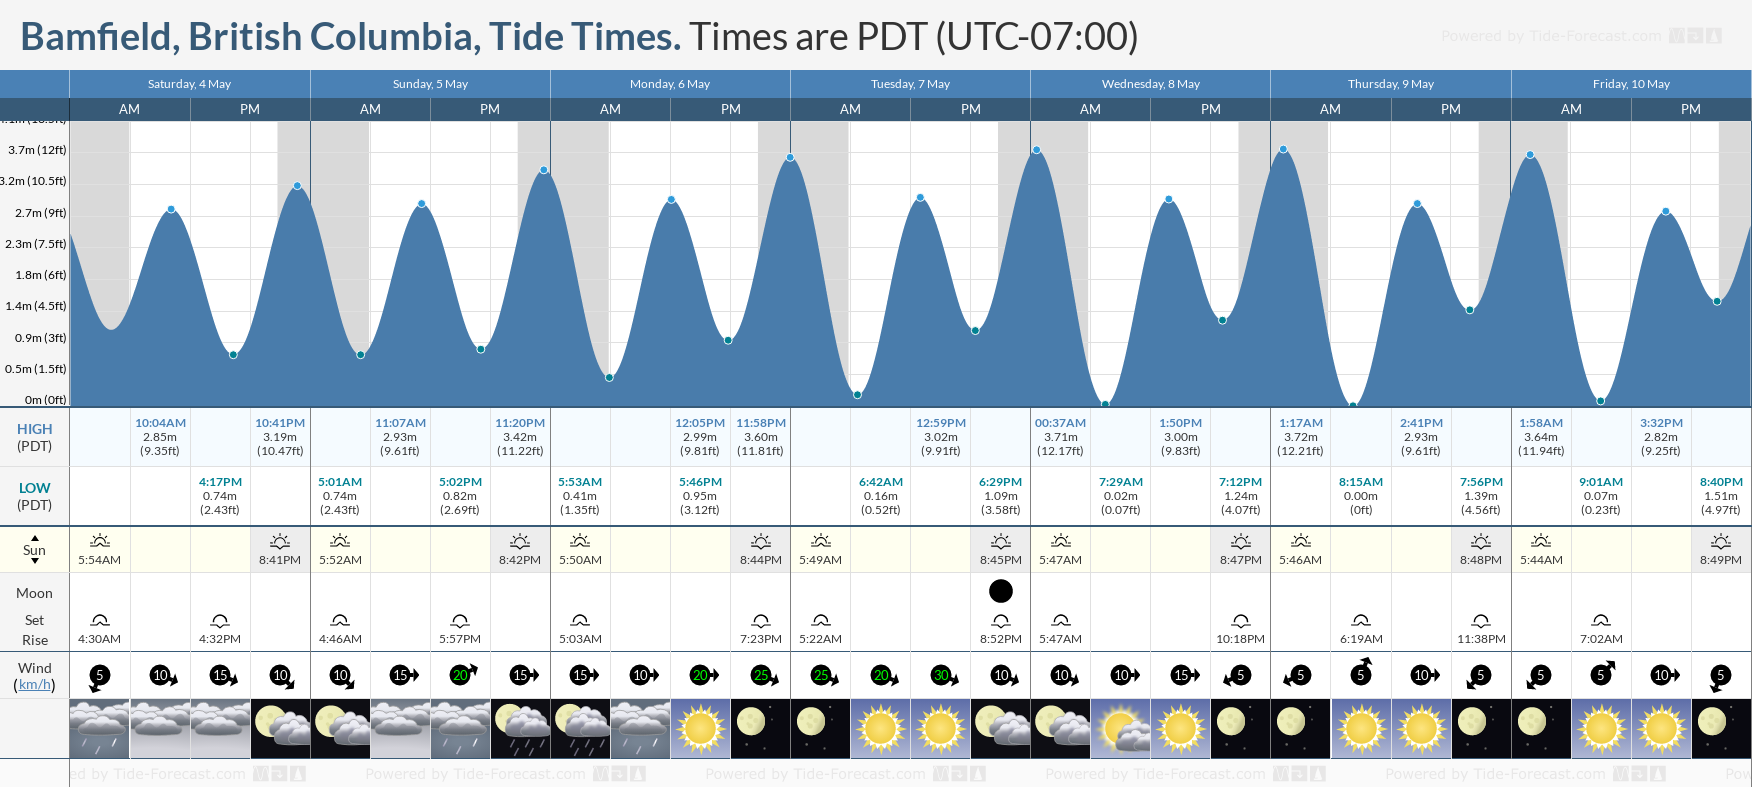 Bamfield, British Columbia Tide Chart including high and low tide times for the next 7 days